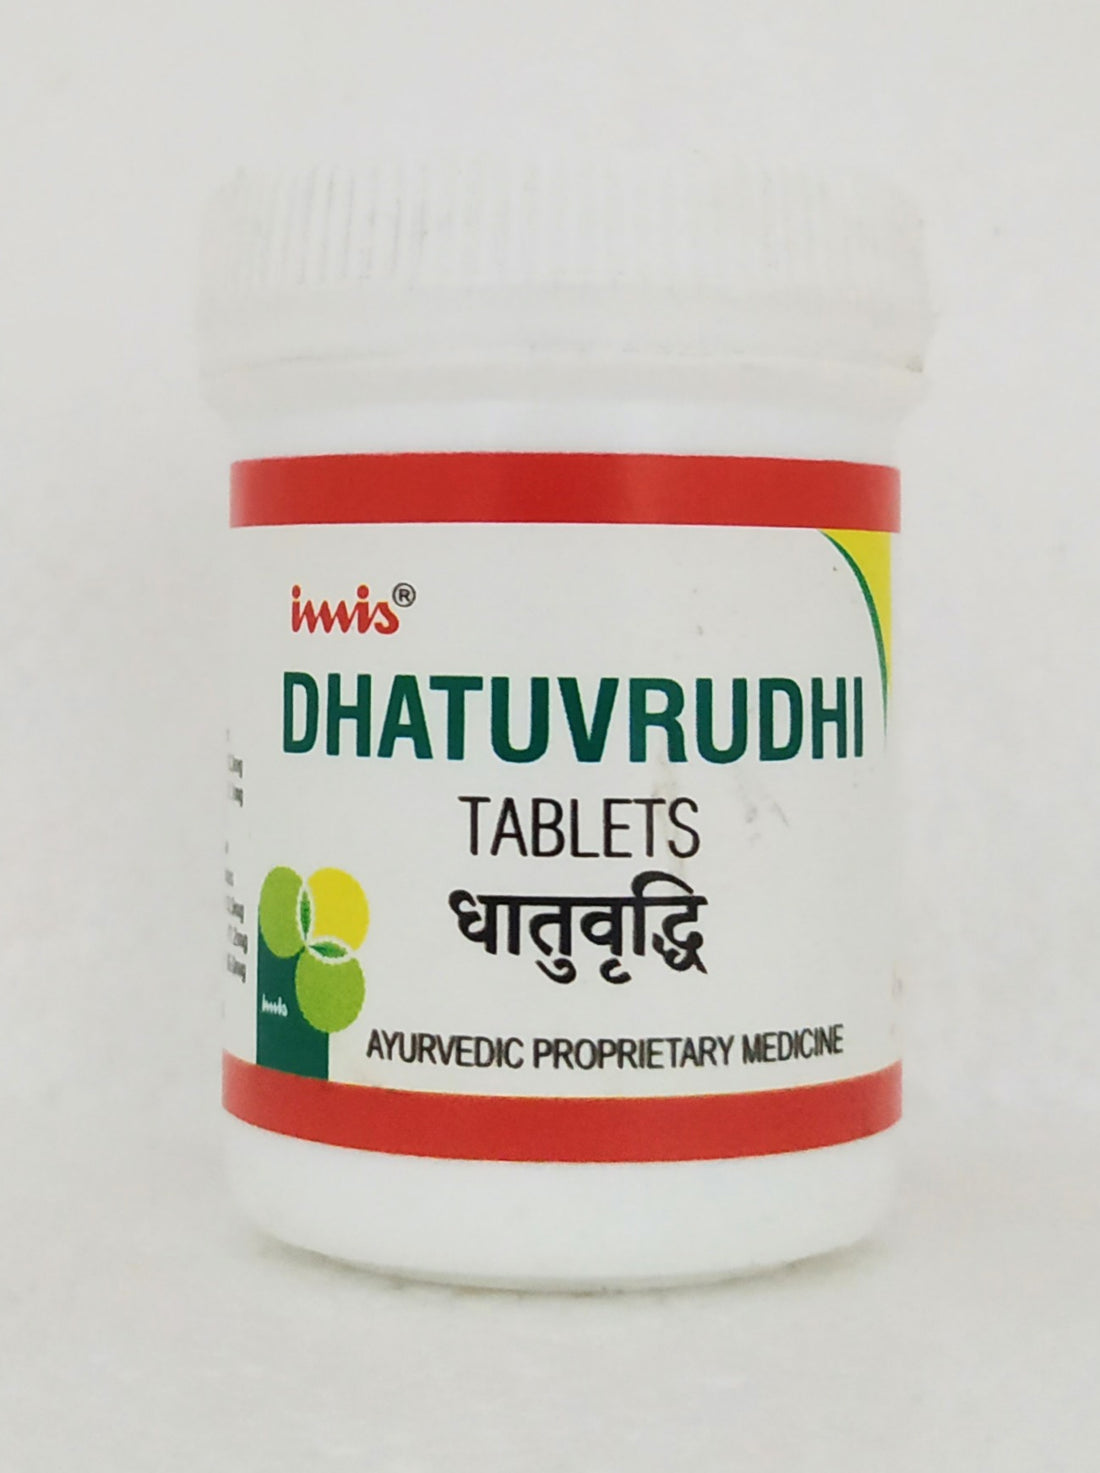 Shop Dhathuvrudhi tablets - 40tablets at price 120.00 from Imis Ayurveda Online - Ayush Care